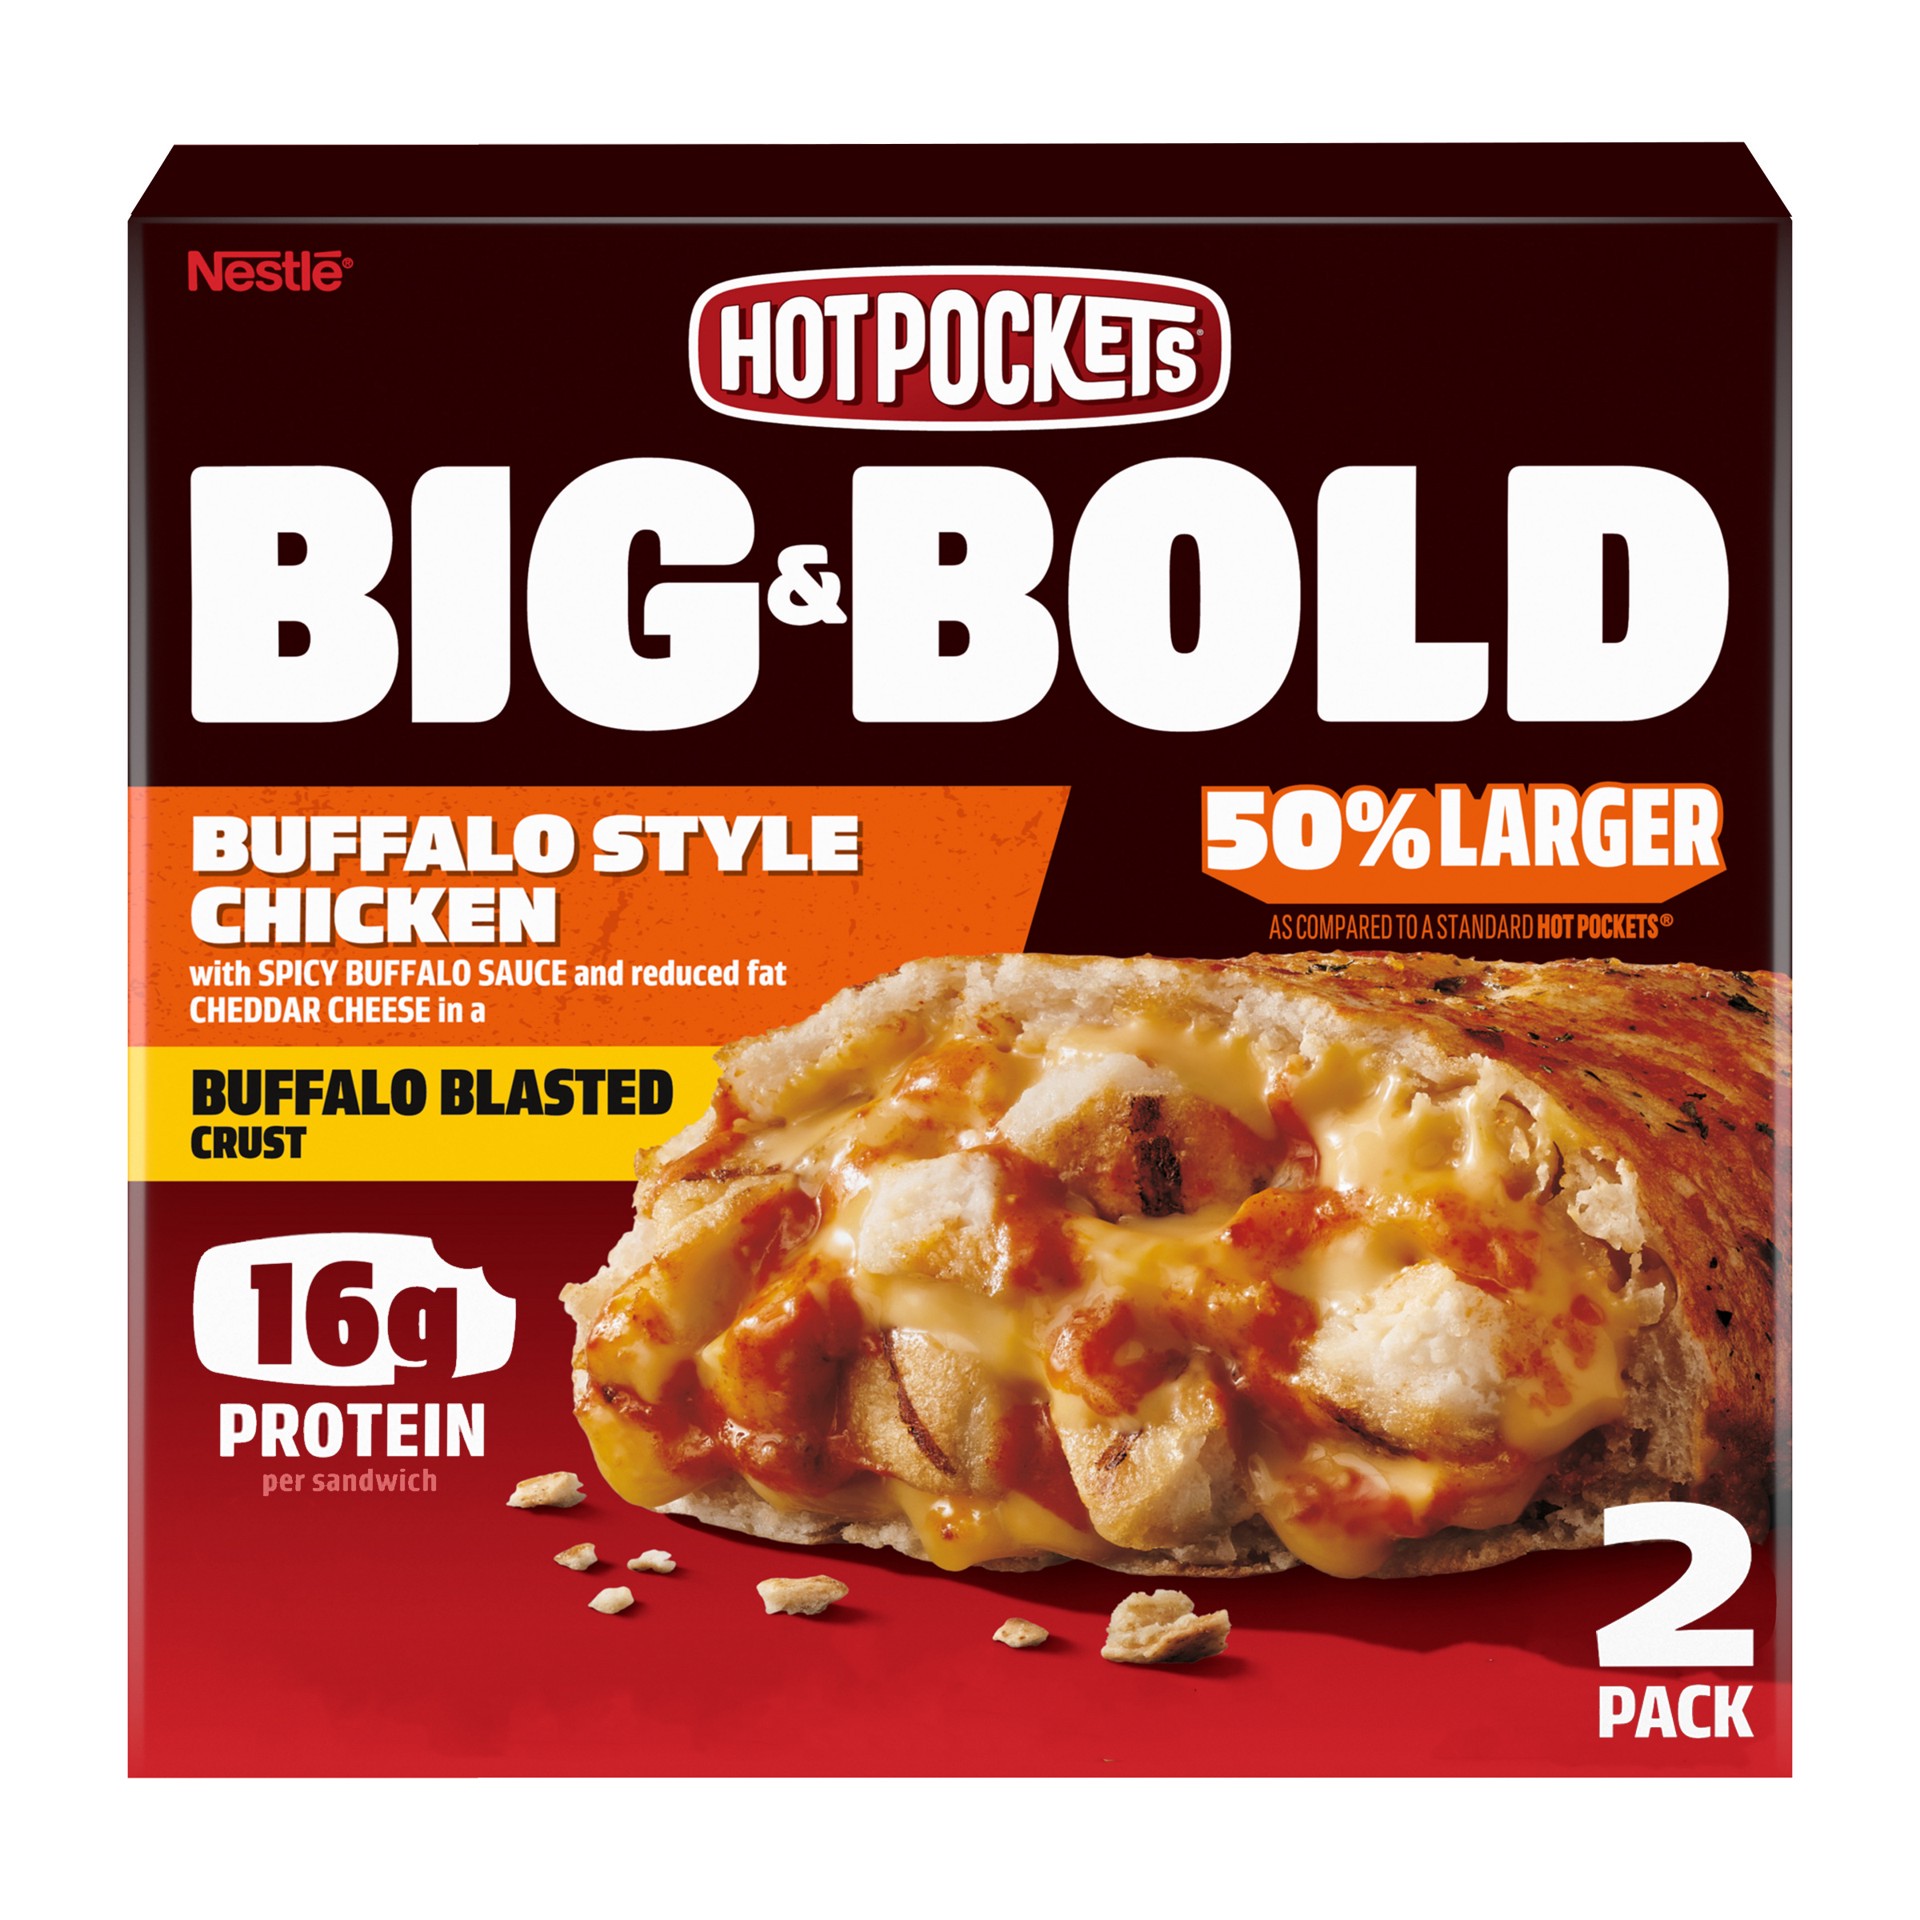 slide 1 of 8, Hot Pockets Big & Bold Buffalo Style Chicken Frozen Snacks, Frozen Buffalo Chicken Sandwiches with White Meat Chicken, 2 Count Microwave Snacks, 13.5 oz